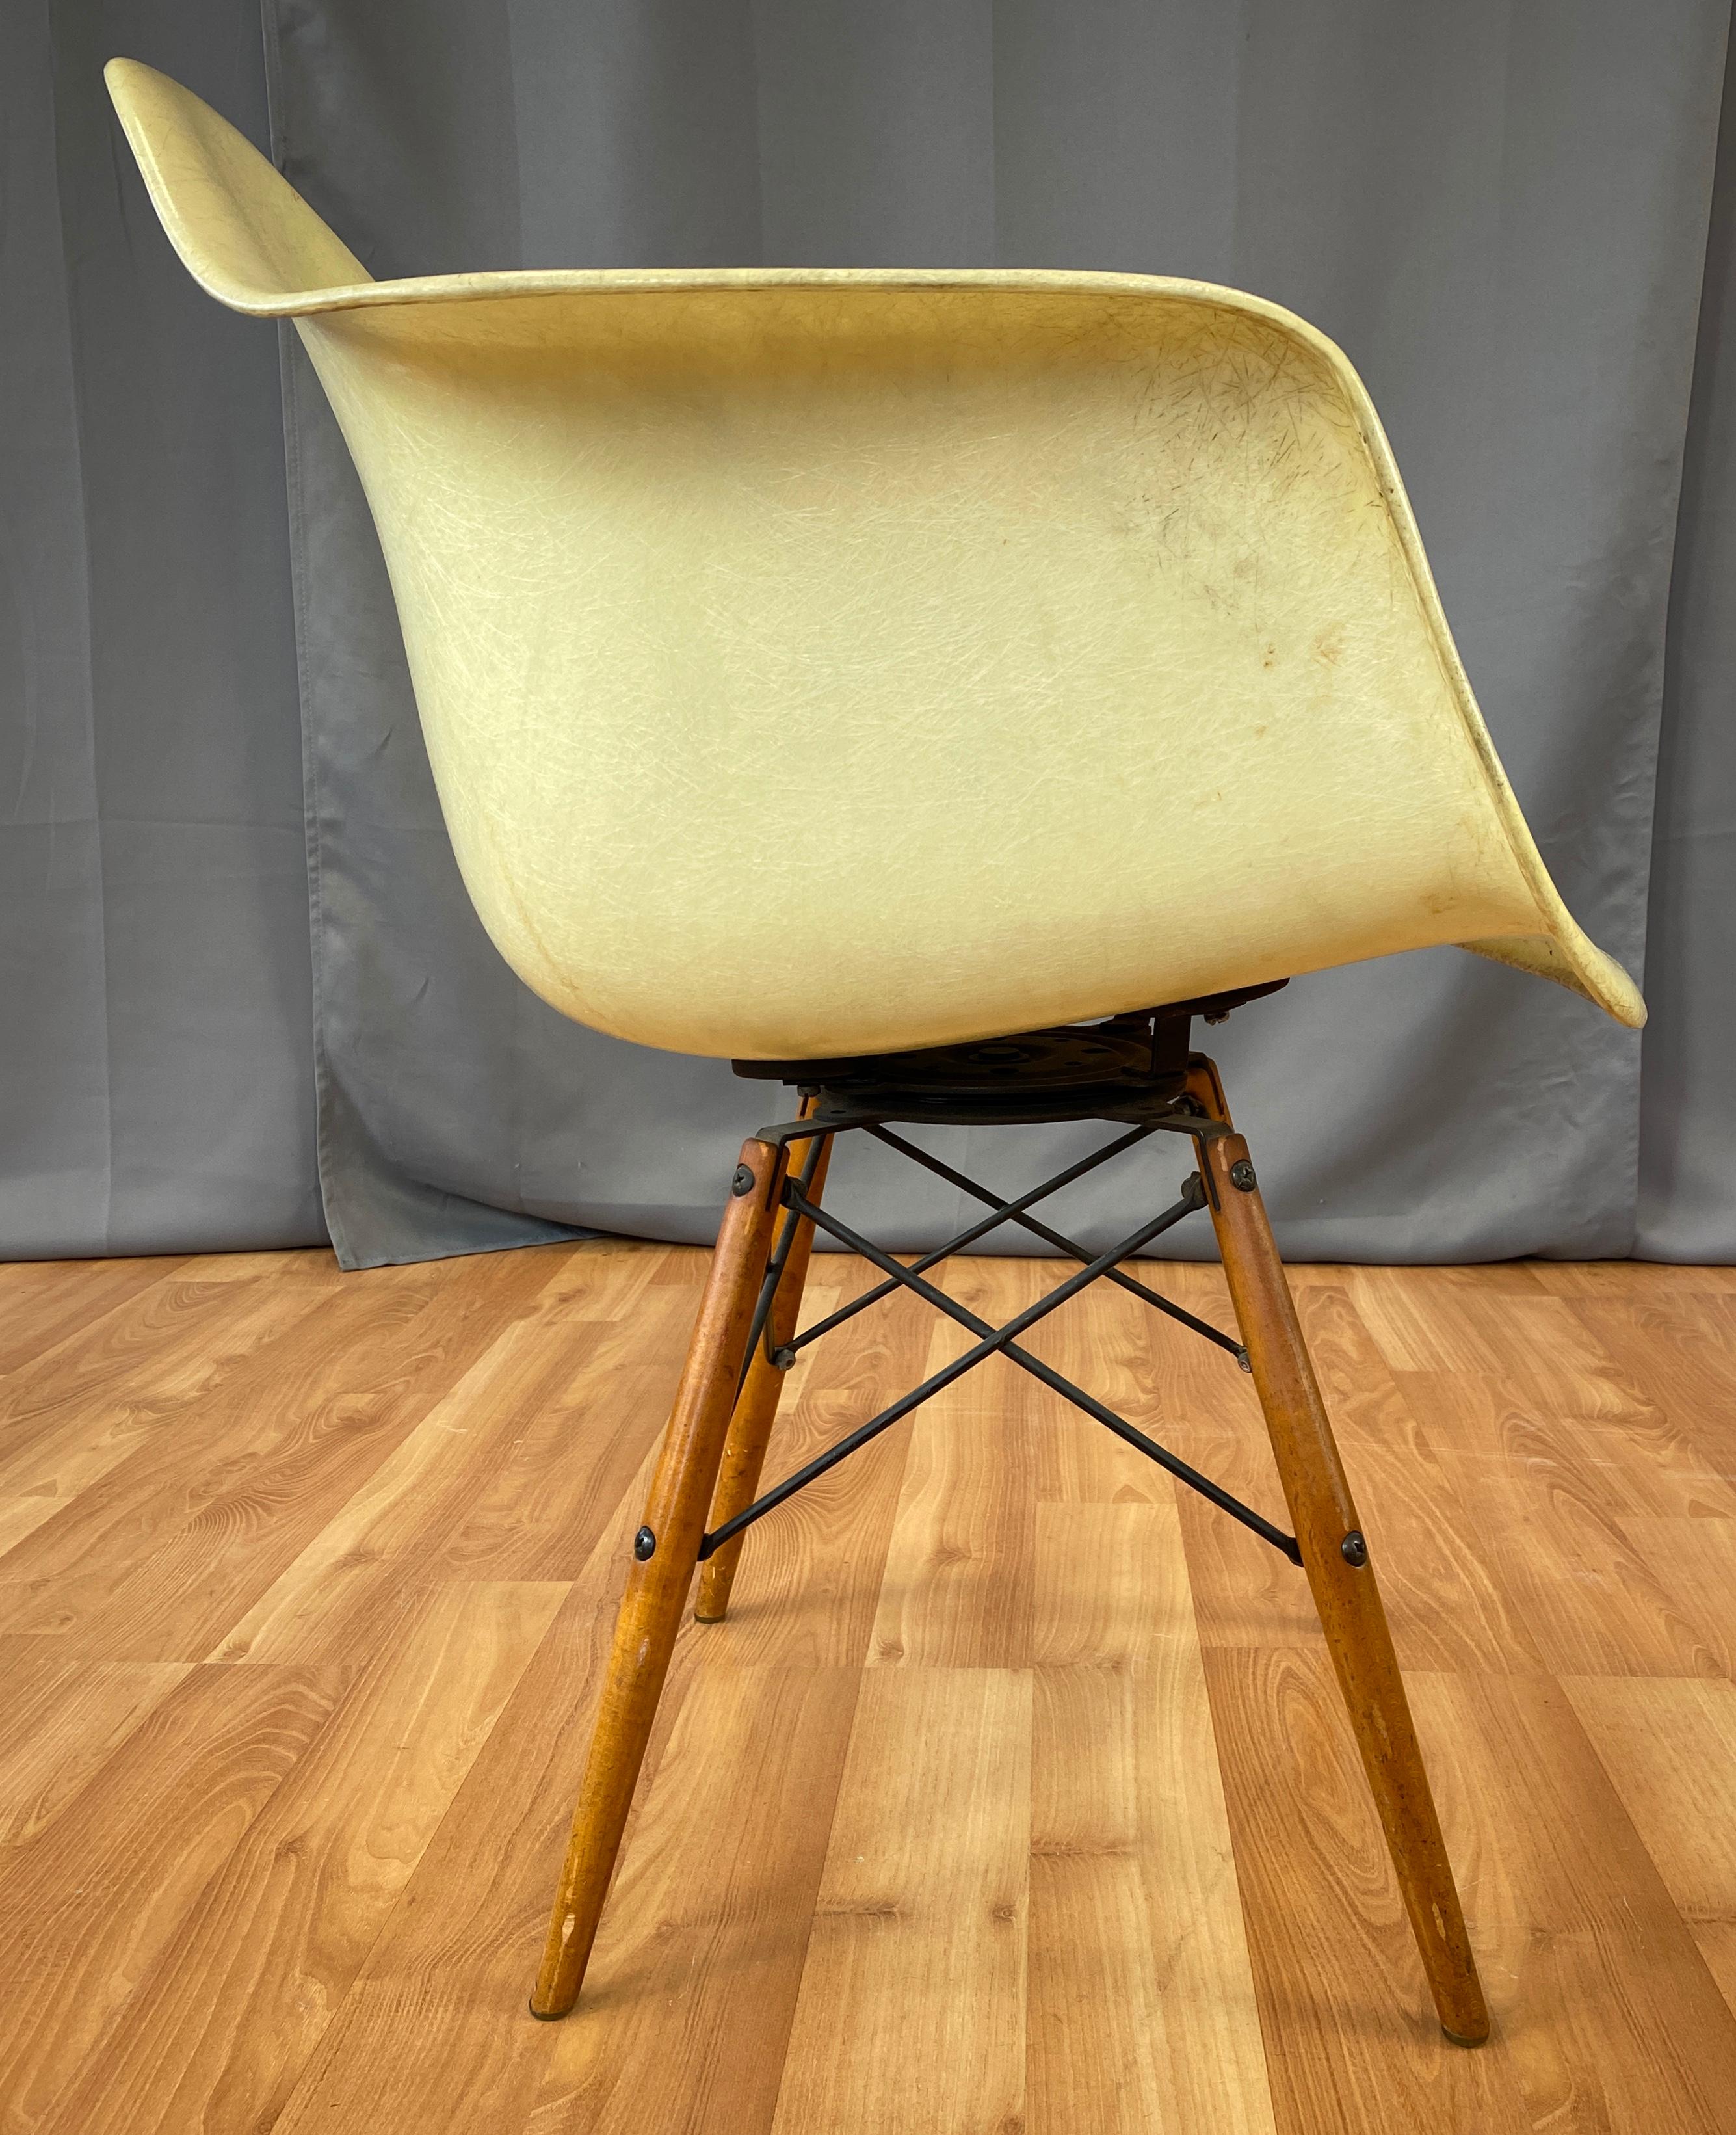 Metal 1st Edition Zenith Plastics Rope Edge Paw Chair Charles Eames for Herman Miller